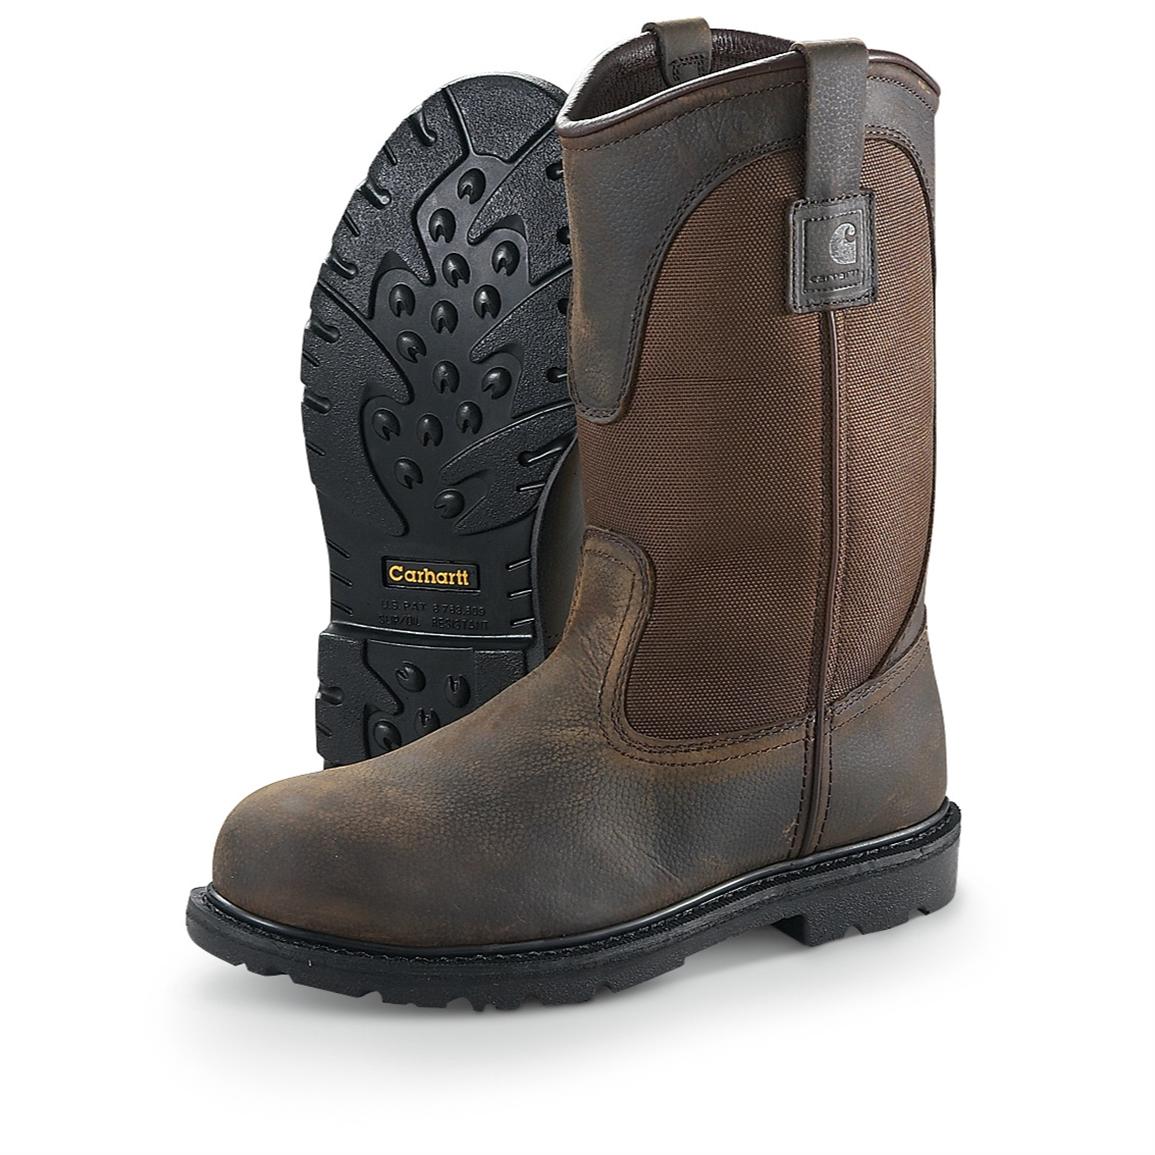 Men's 10" 3711 Carhartt® Waterproof Pull on Work Boots 209266, Work Boots at Sportsman's Guide